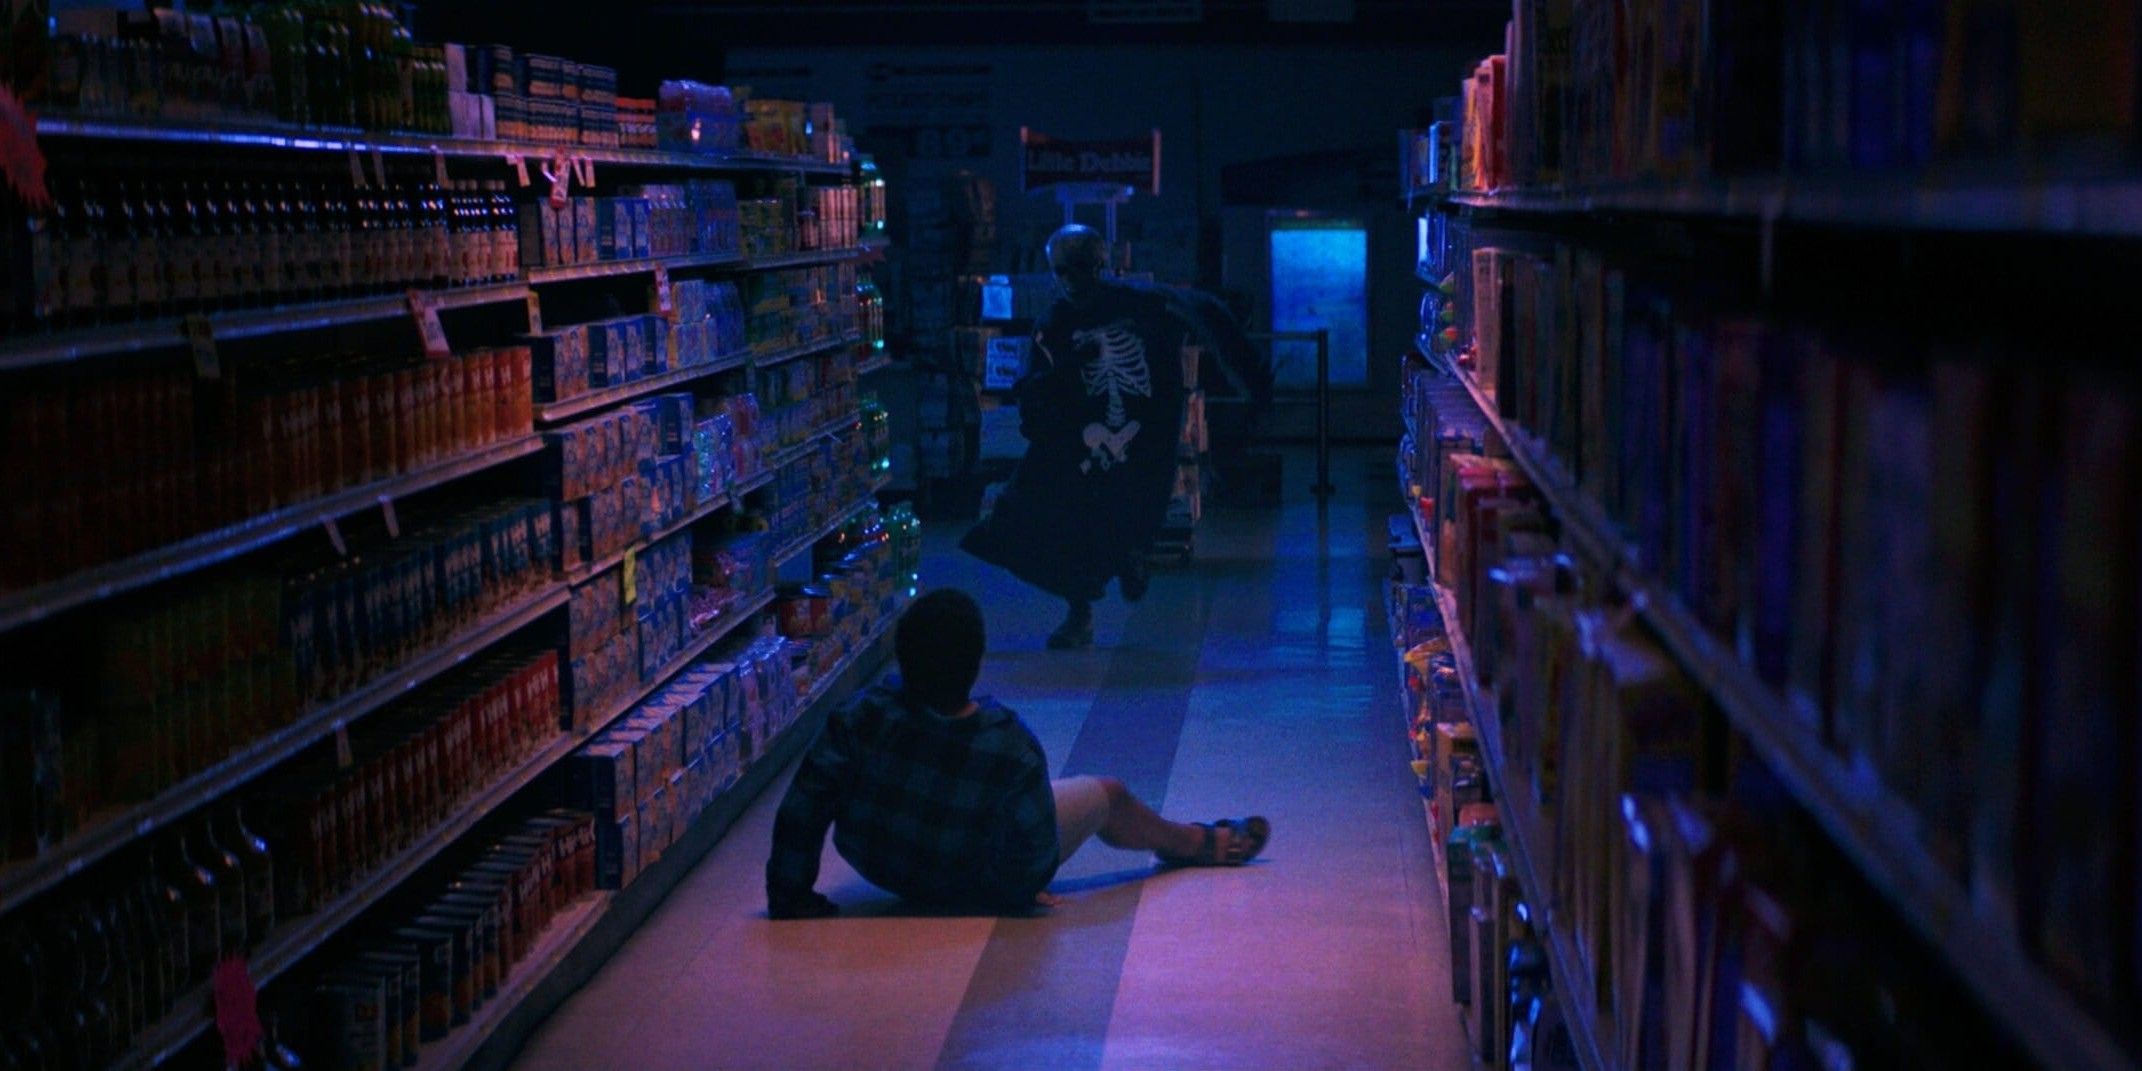 Josh on the floor in a drug store aisle as the skeleton-dressed man runs at him.